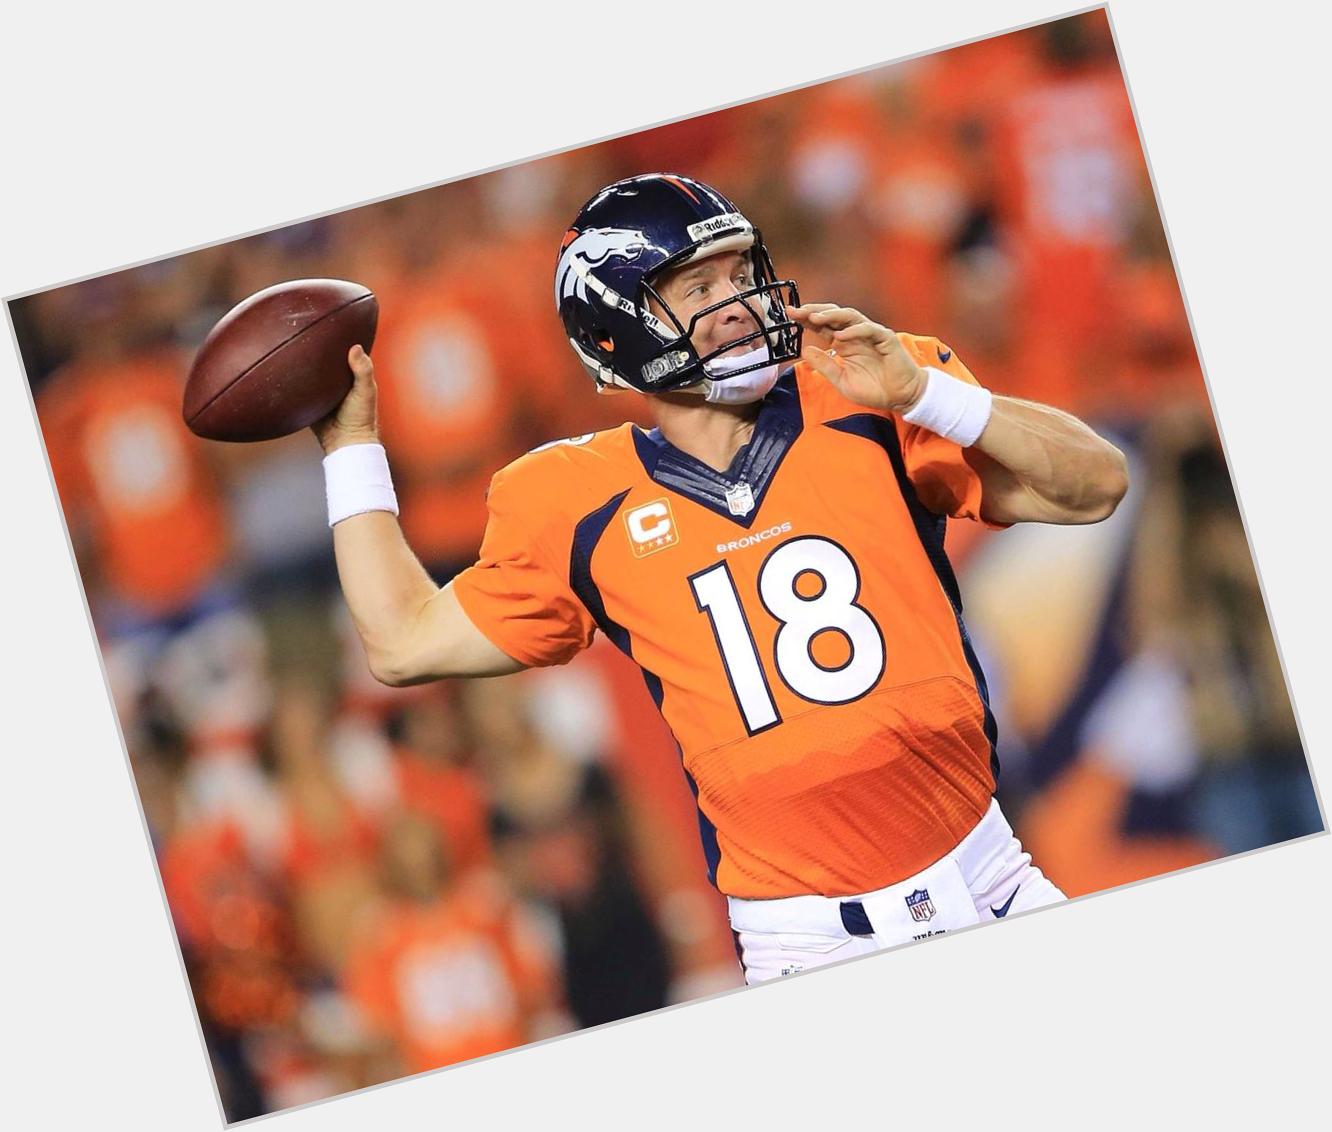 Happy 39th birthday to Peyton Manning! He\s still one of my favorite players of all time! 